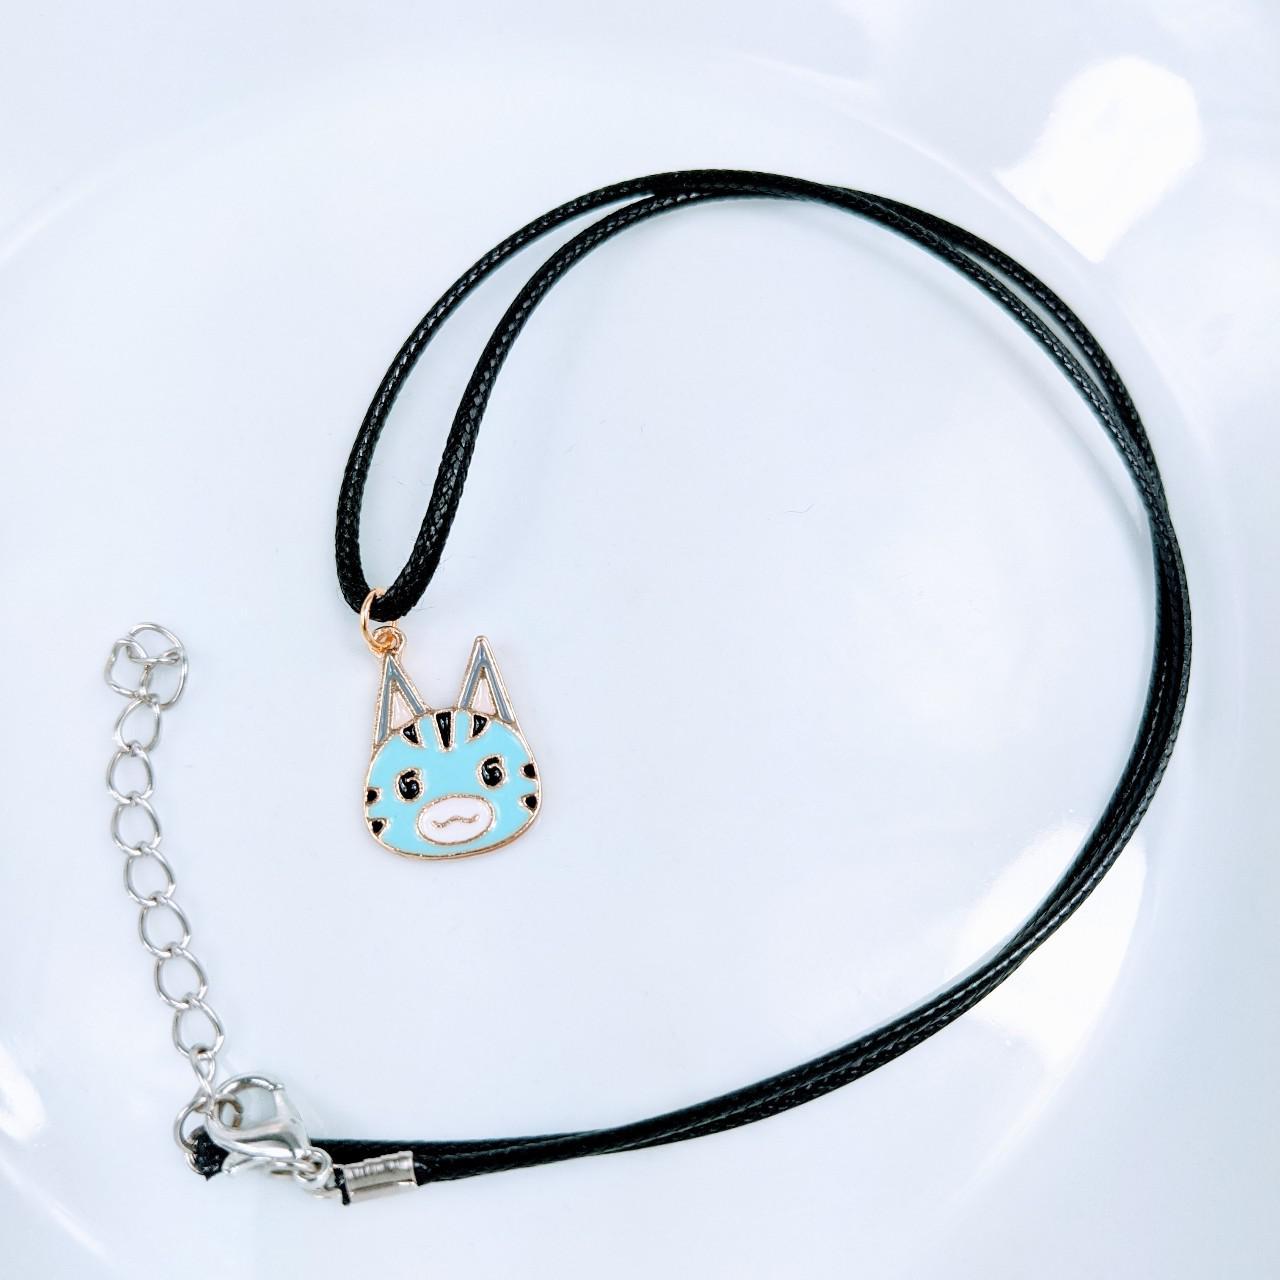 Product Image 3 - Animal Crossing Cat Necklace
Brand new.